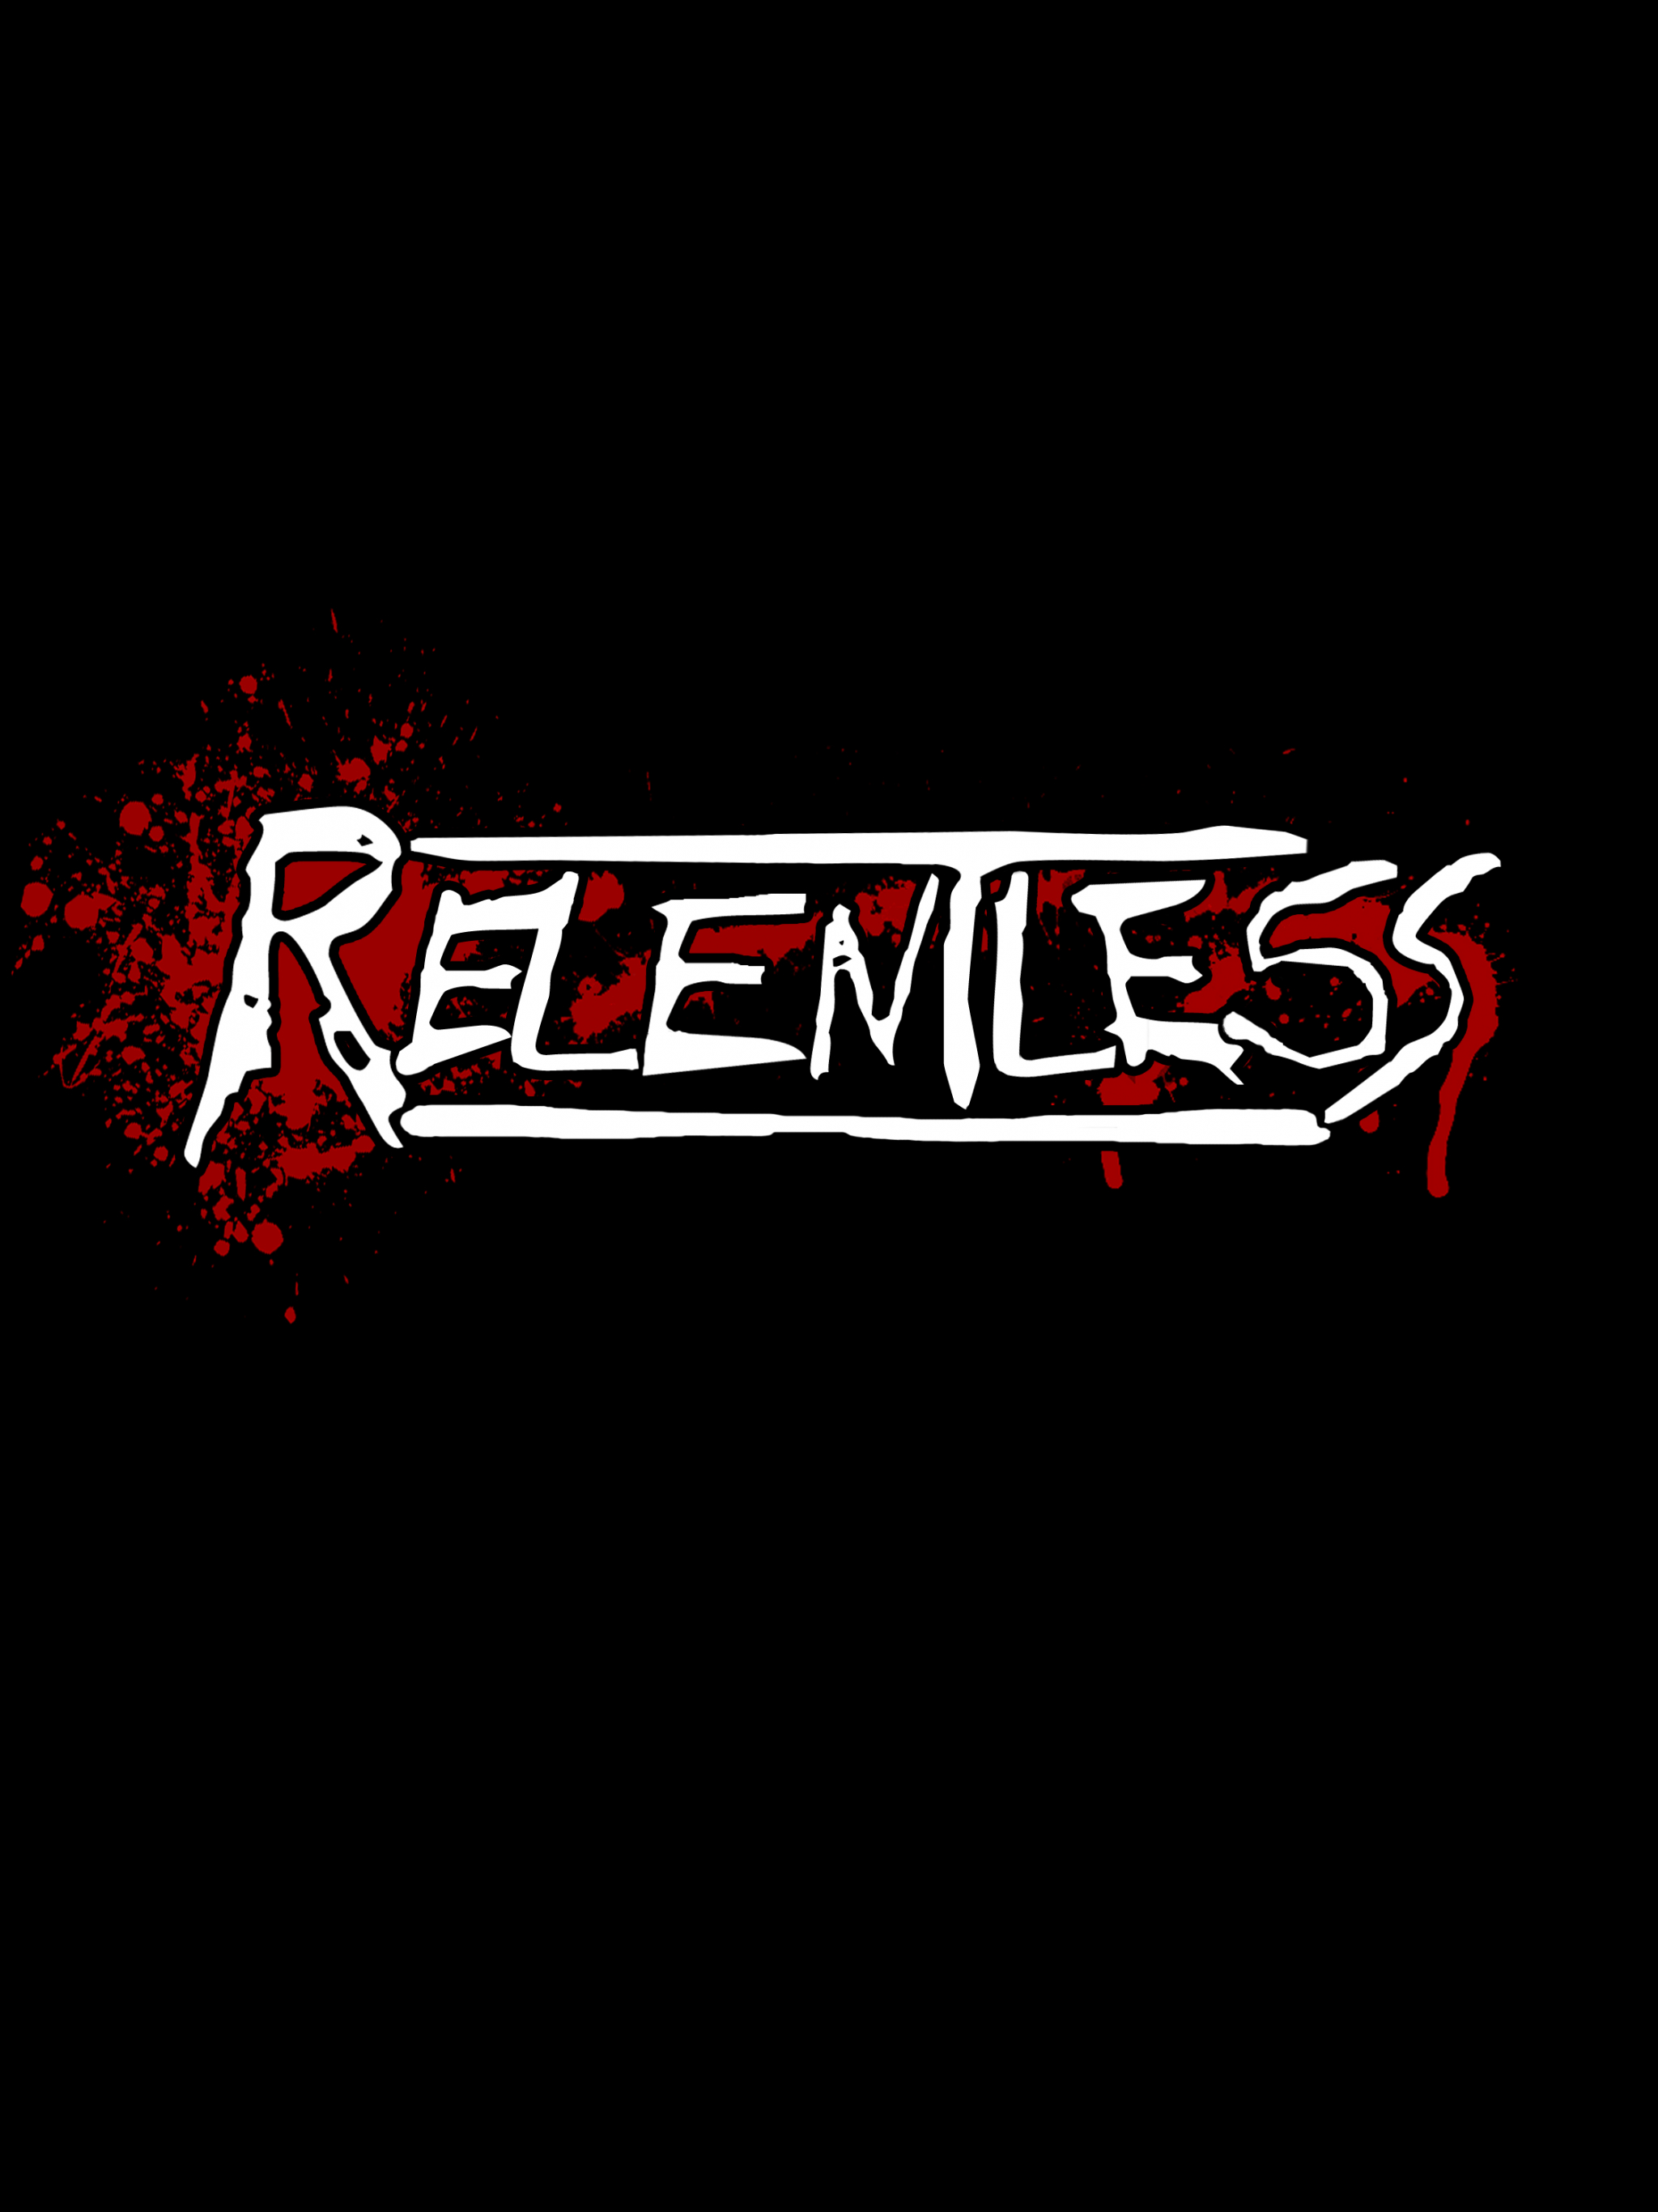 Relentless Logo Music Bands High Quality Image HD